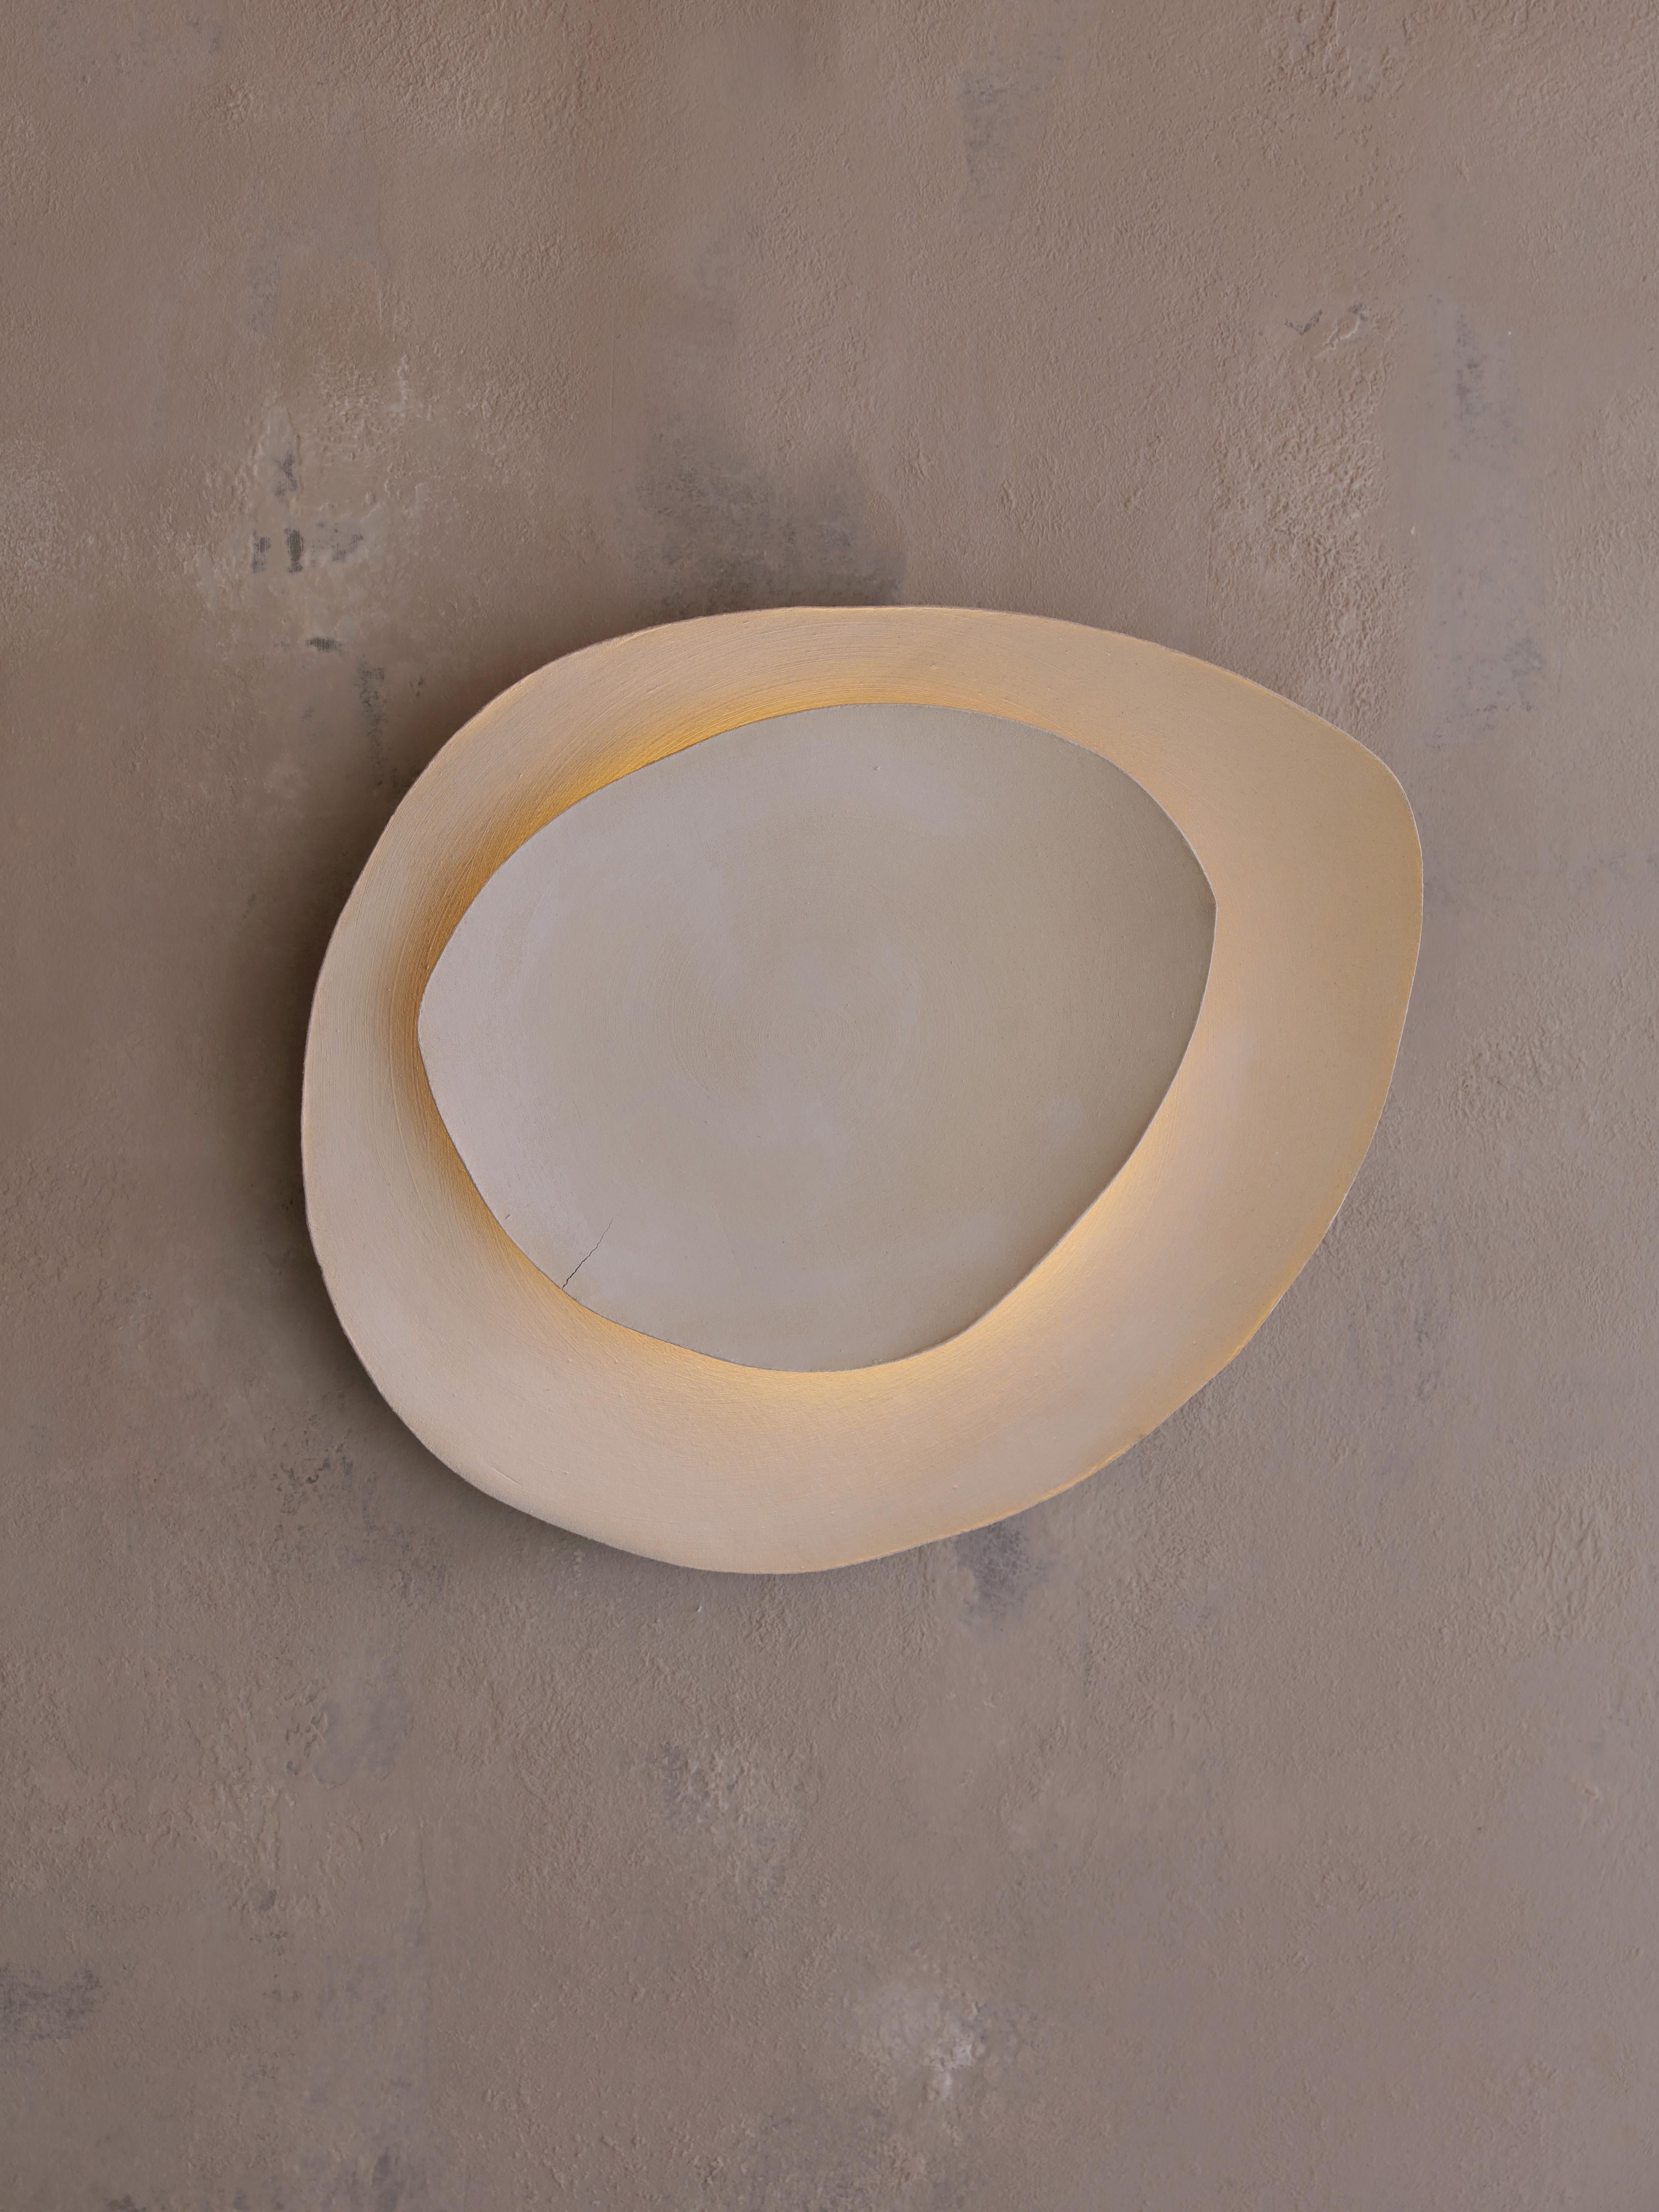 Chalk #2 wall light by Margaux Leycuras
One of a Kind, Signed and numbered
Dimensions: D 6 x W 46 x H 38cm 
Material: Ceramic, sand stoneware tops with a porcelain engobe finish.
The piece is signed, numbered and delivered with a certificate of